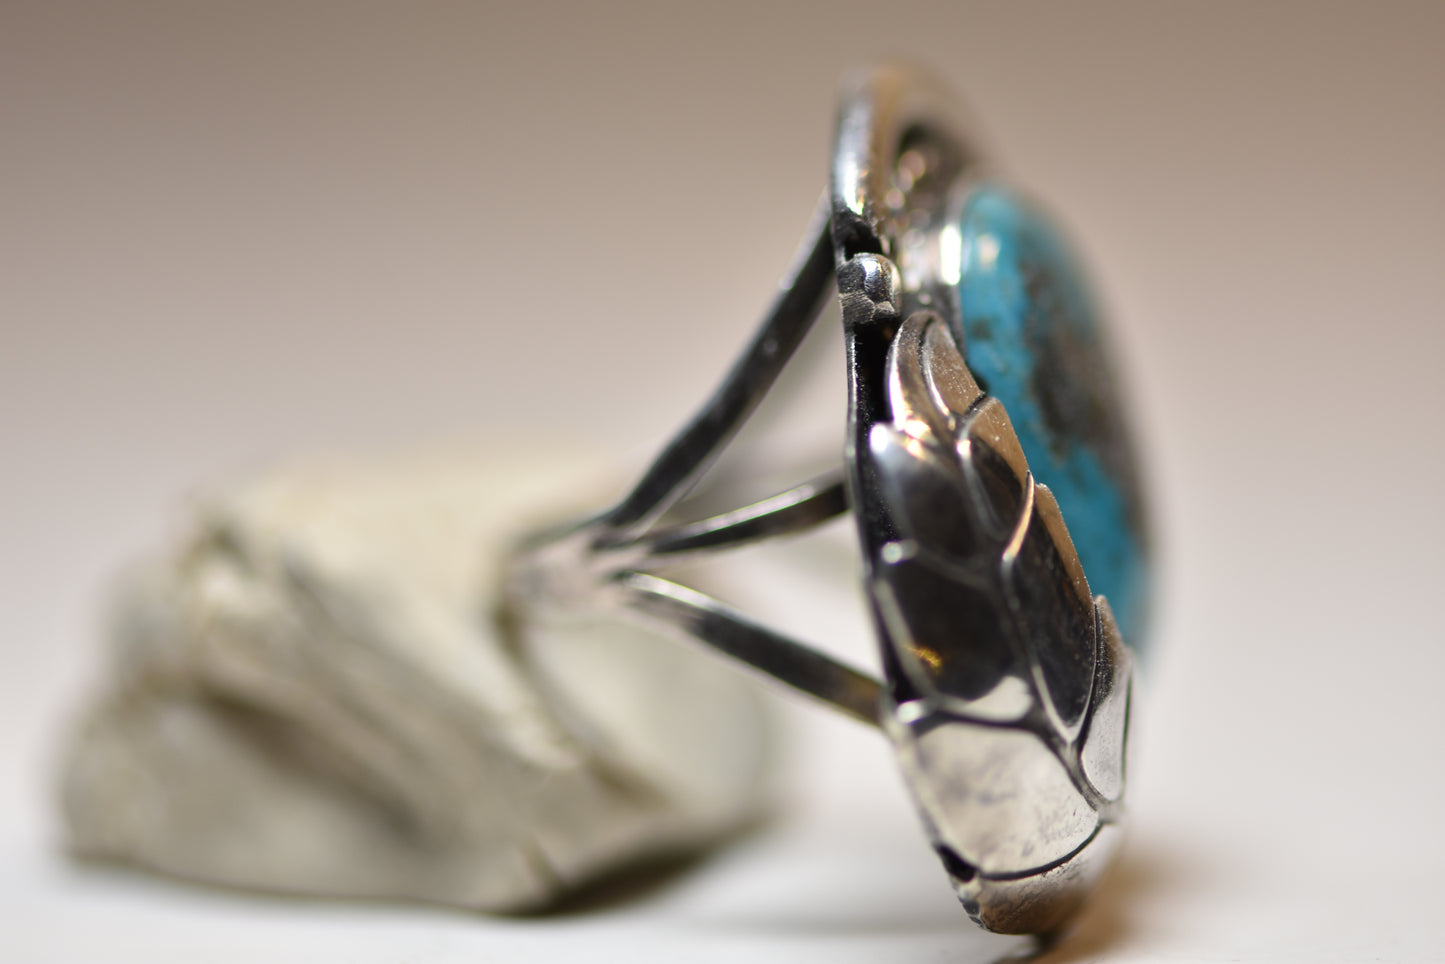 Turquoise ring leaf sterling silver women girls